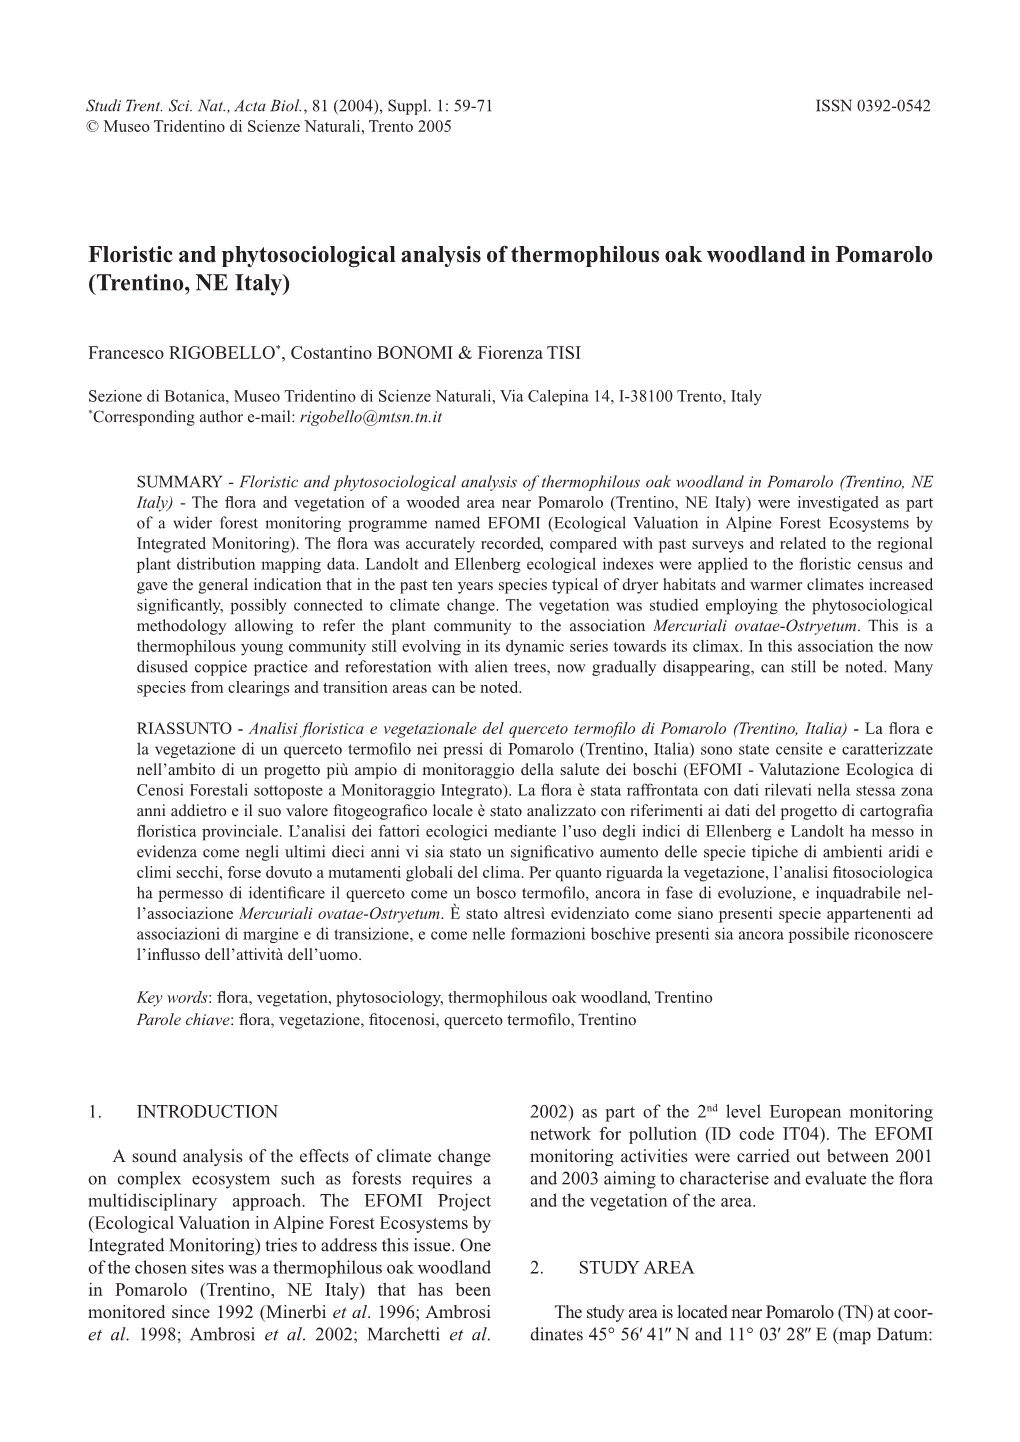 Floristic and Phytosociological Analysis of Thermophilous Oak Woodland in Pomarolo (Trentino, NE Italy)